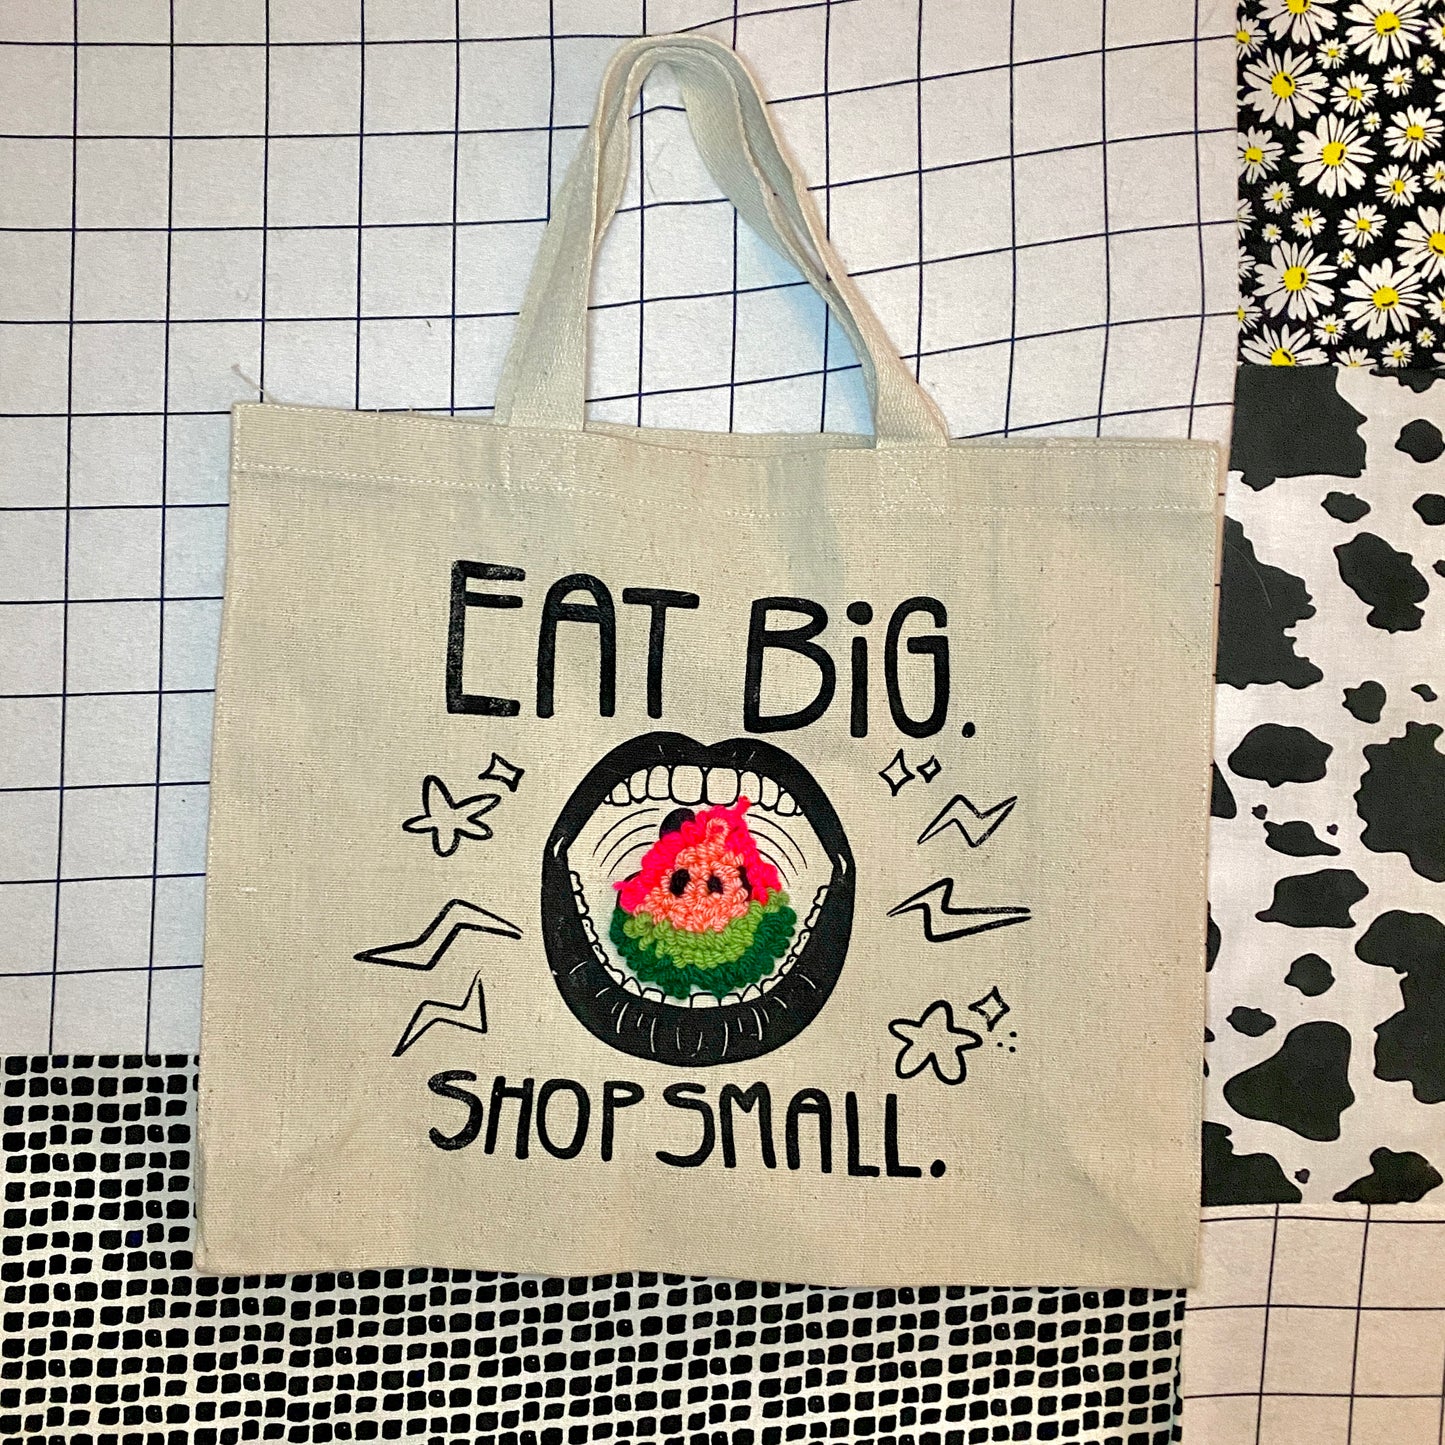 Eat Big, Shop Small Hand Needle Punched, Screen Printed Canvas Tote + Rug